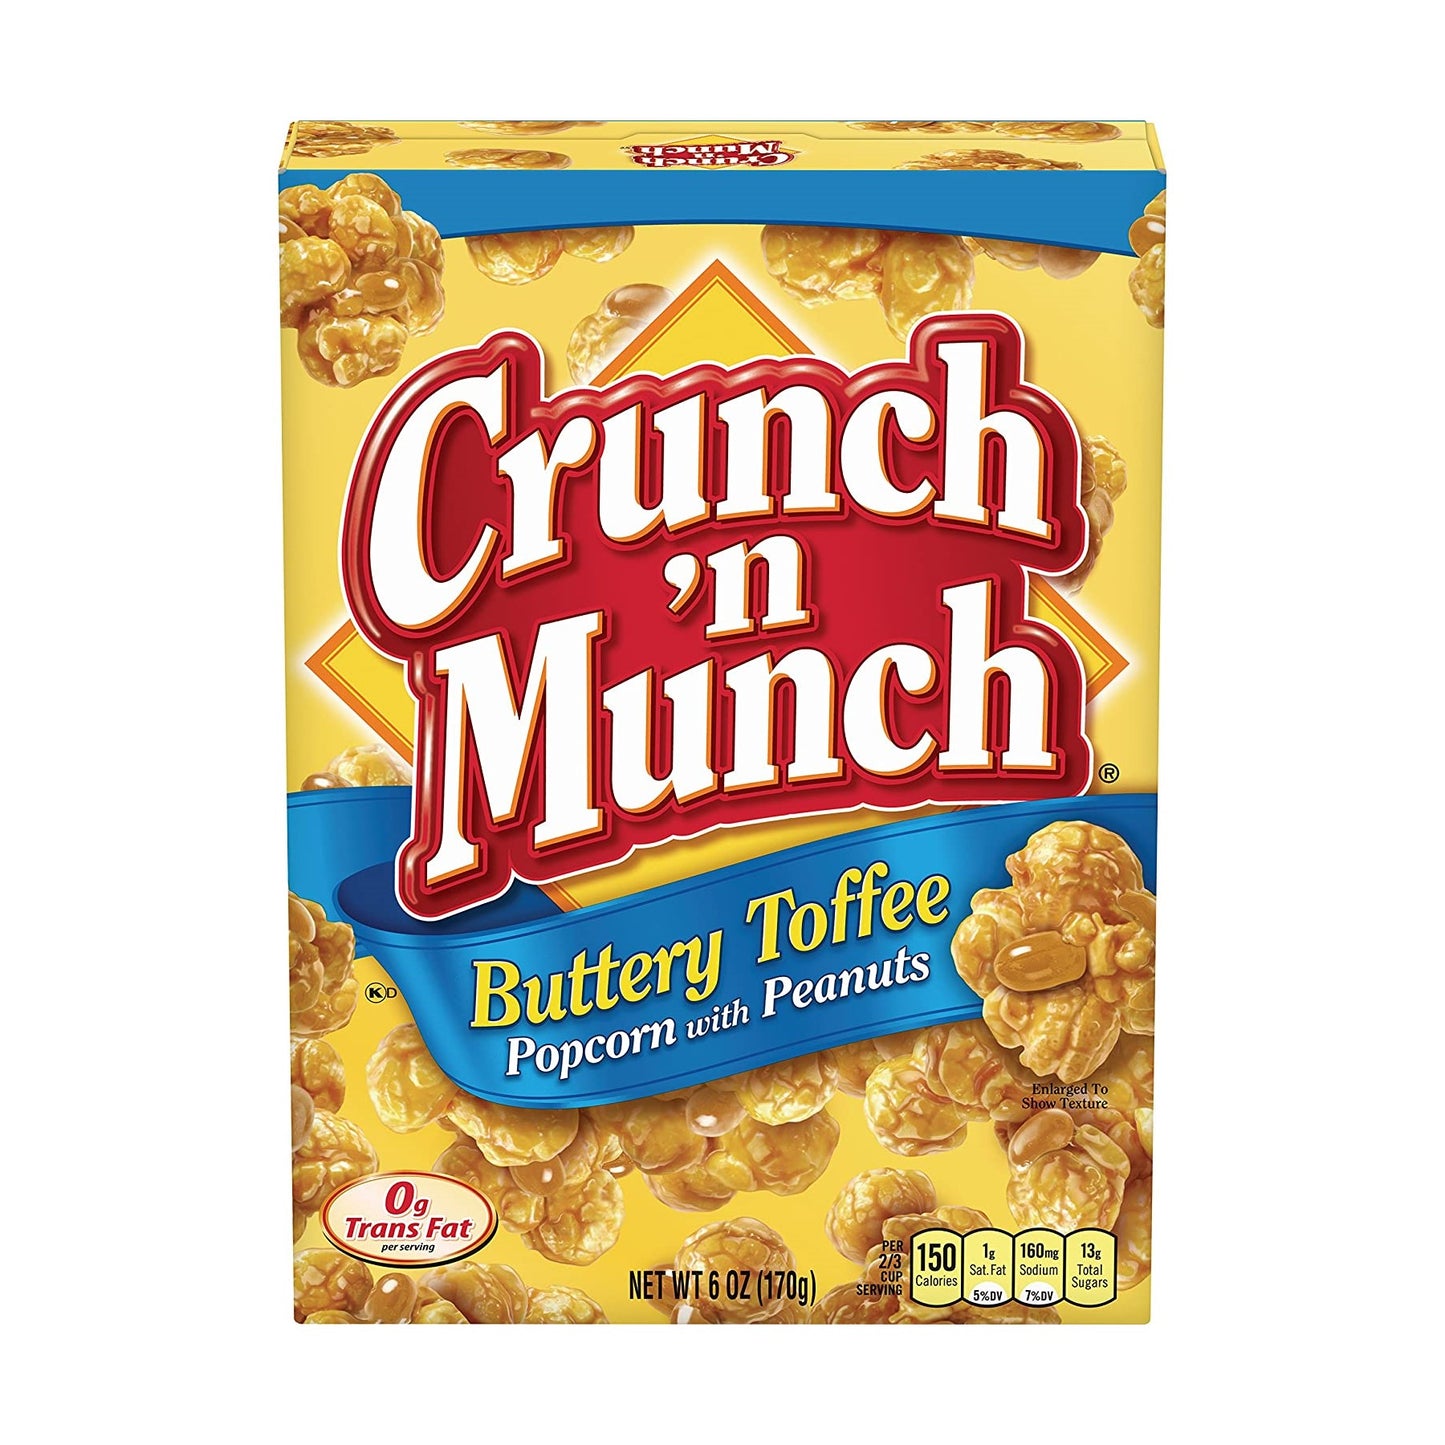 Crunch 'N Munch Popcorn with Peanuts - Buttery Toffee 6oz